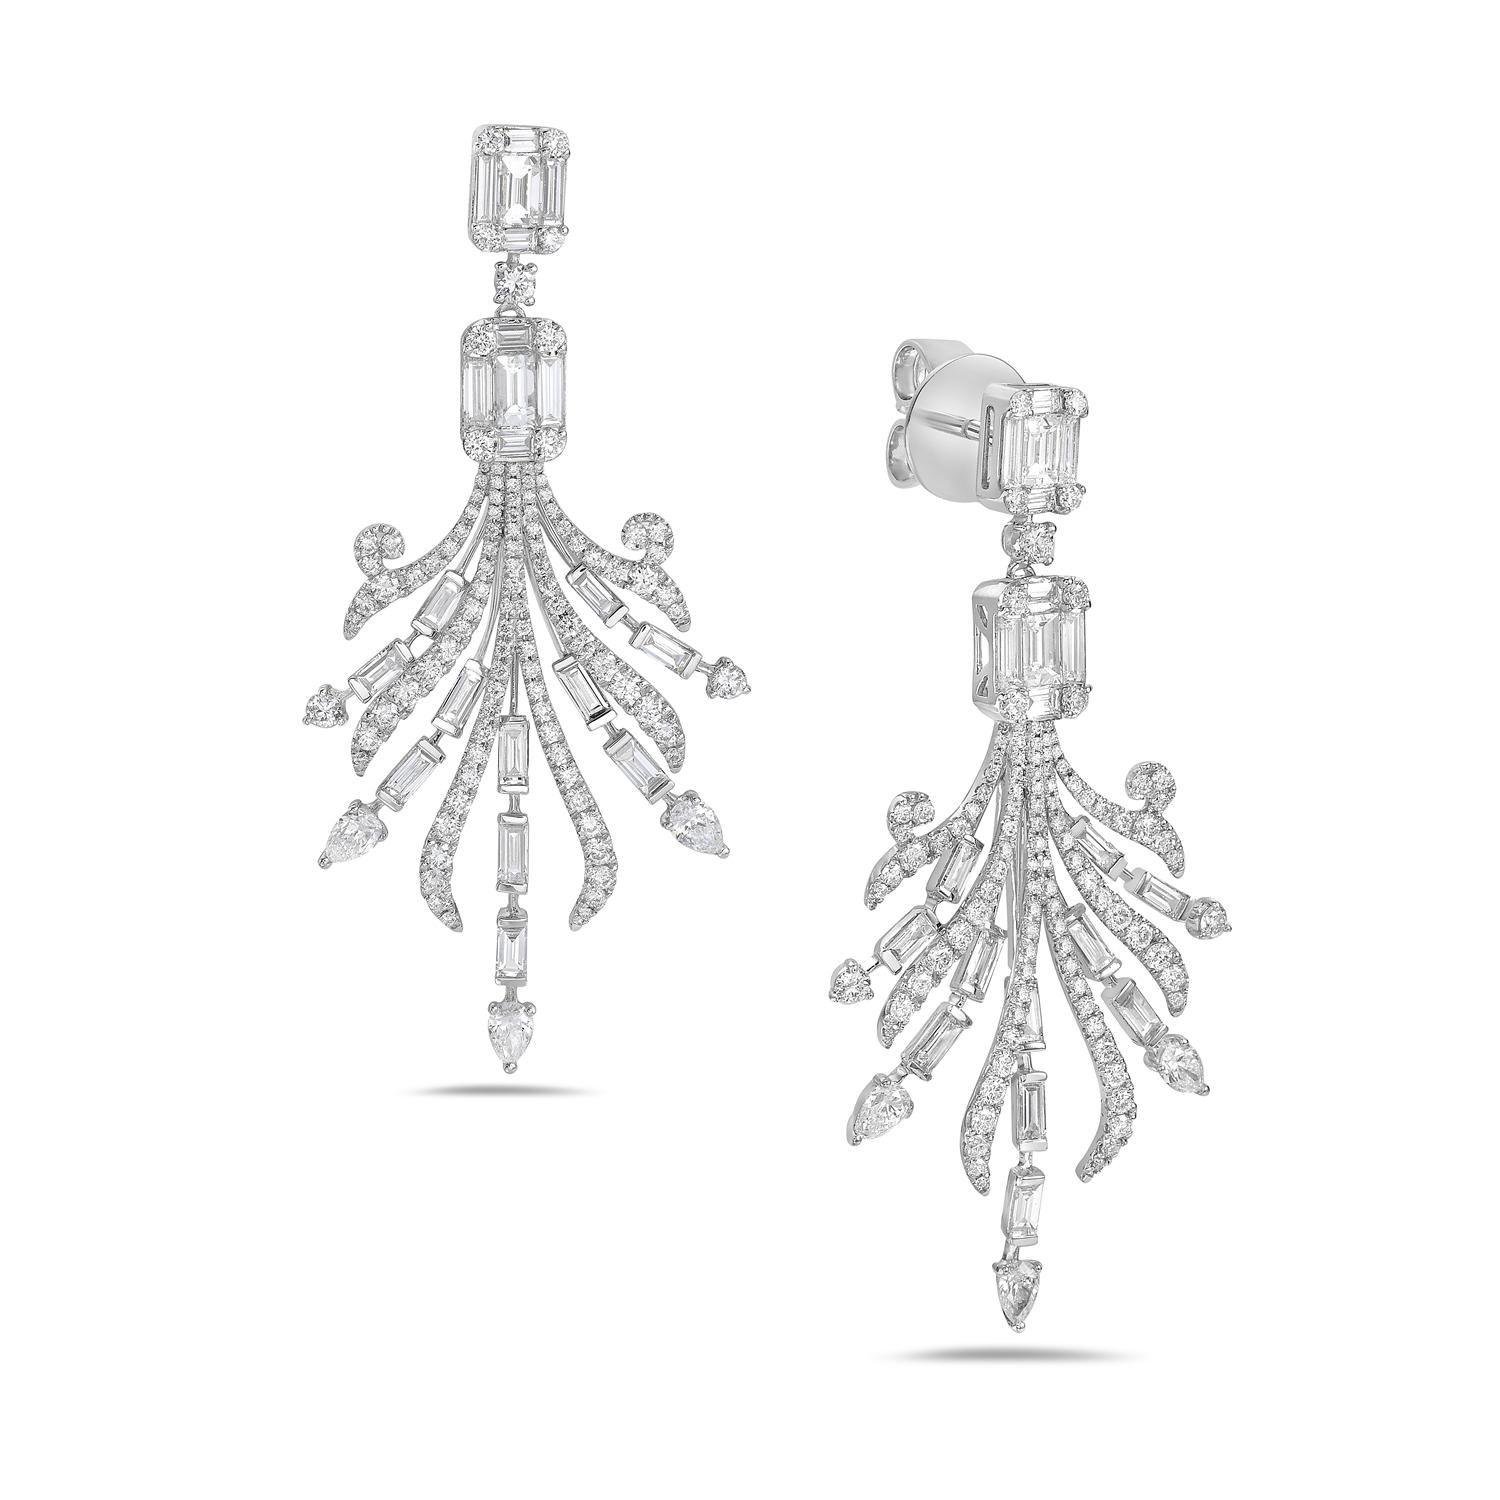 Contemporary 3.96 Ct Diamond Floral Dangle Earrings Made In 18k White Gold For Sale